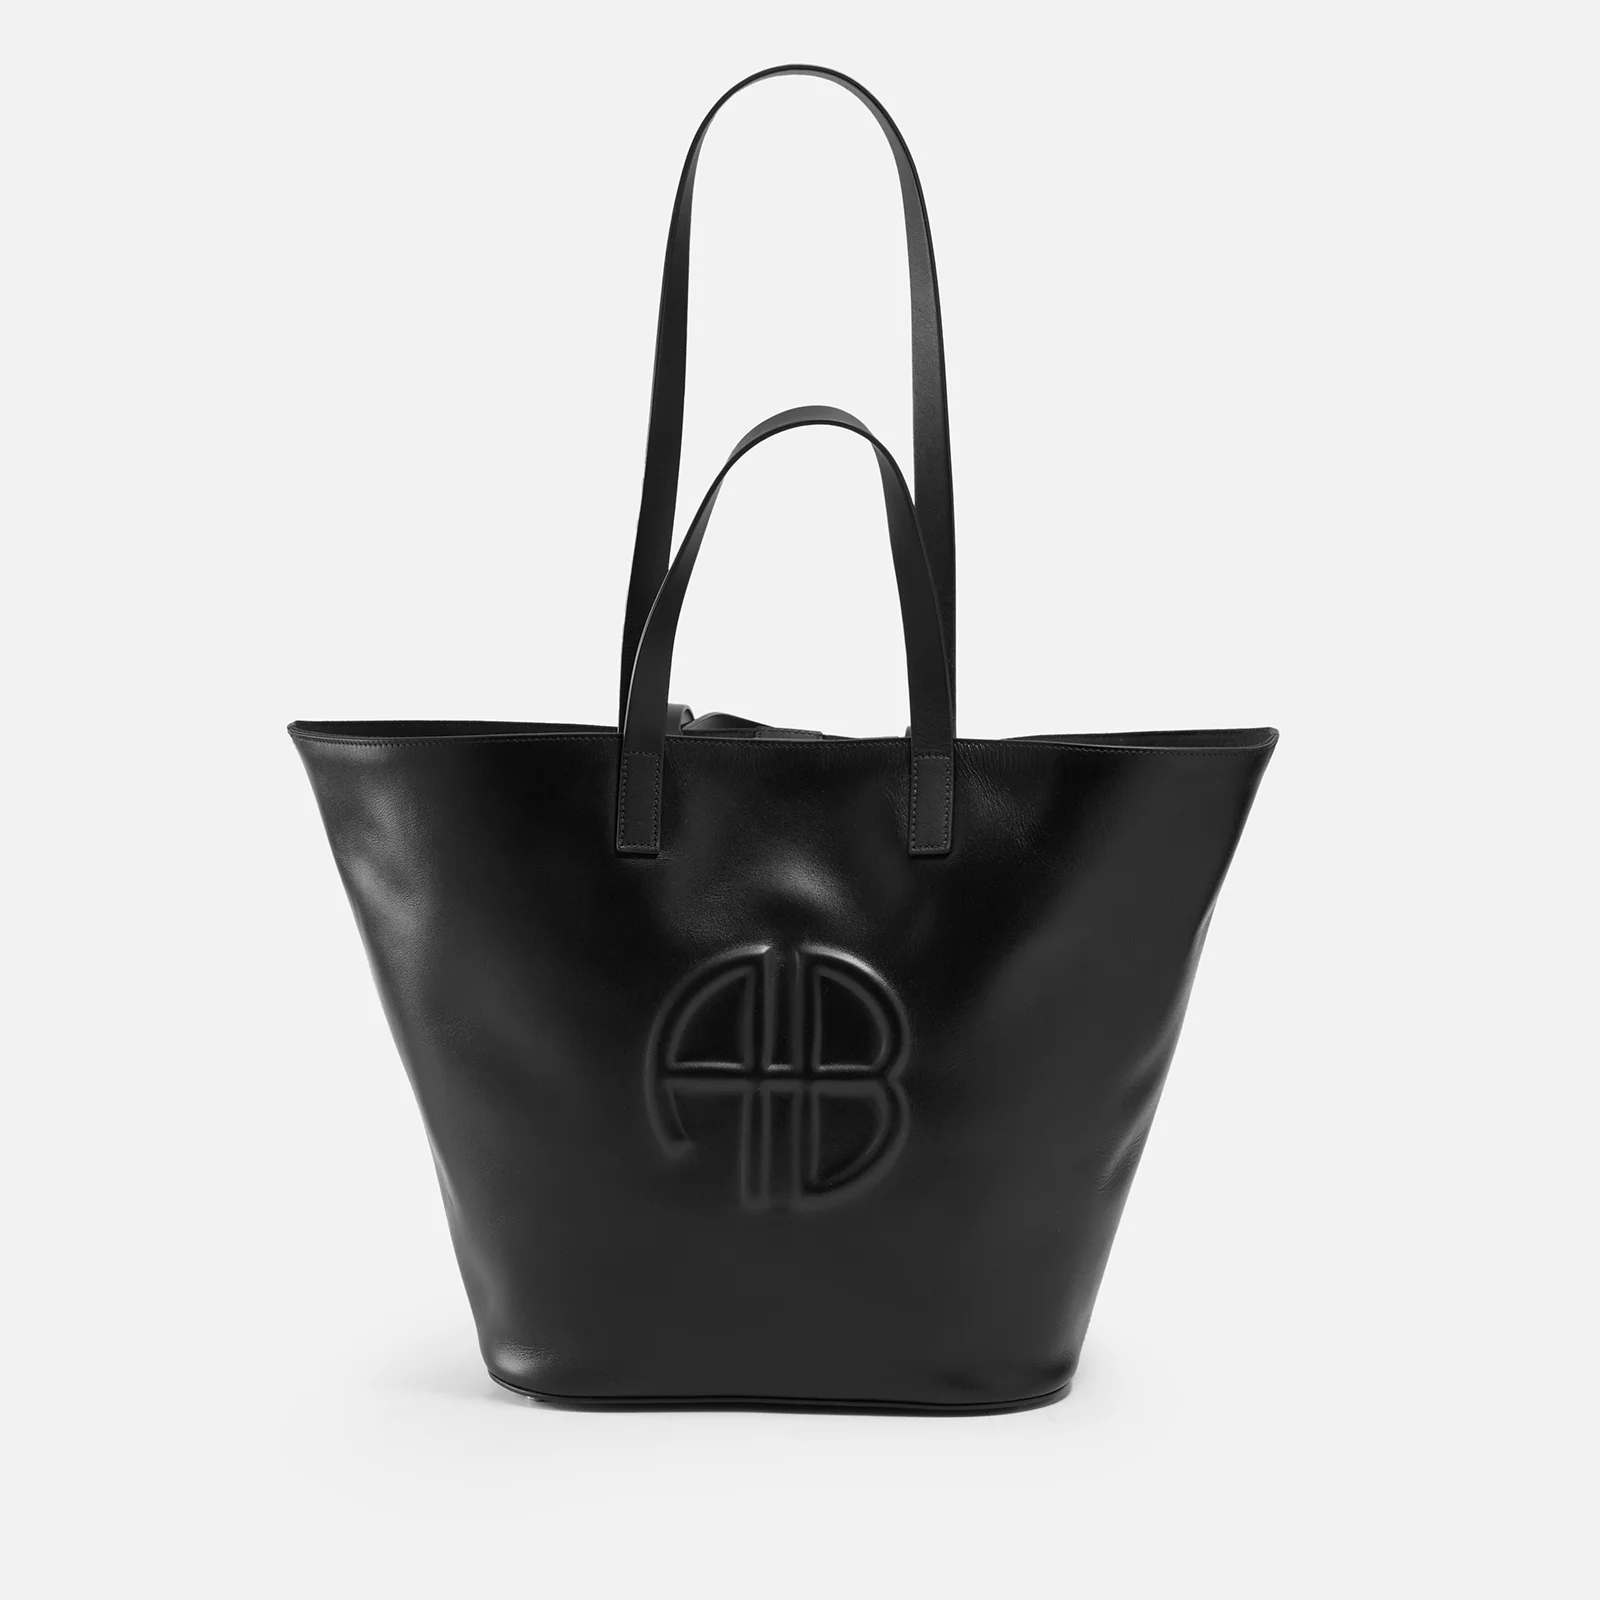 Anine Bing Palermo Leather Tote Bag Image 1